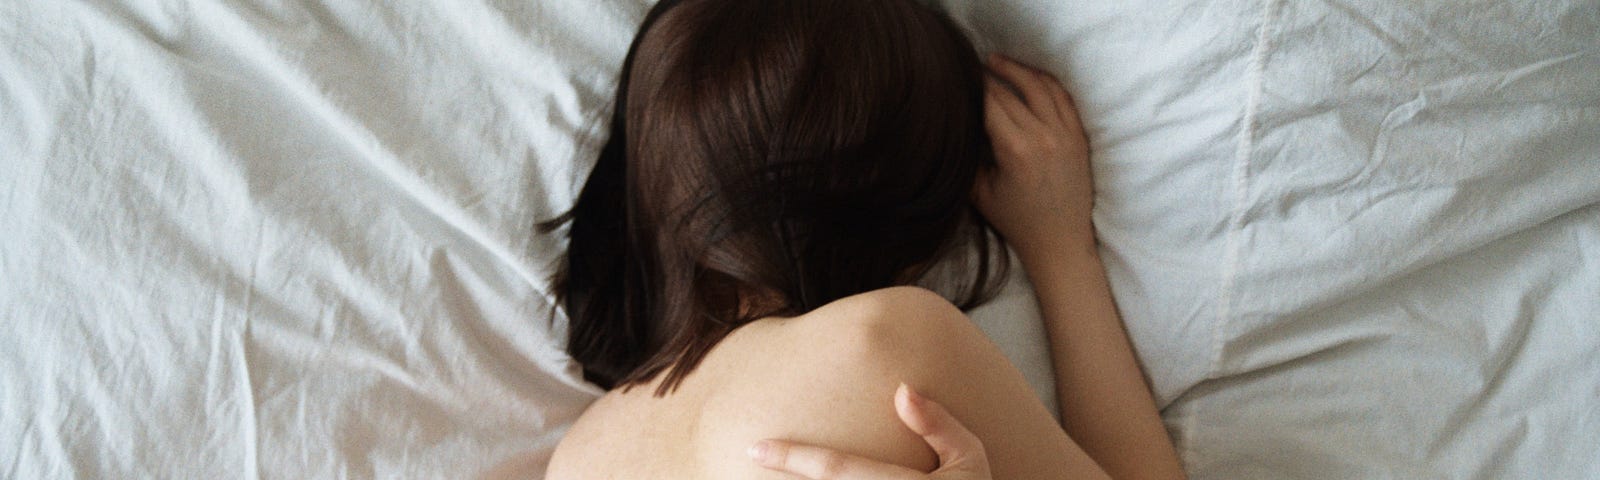 You see the upper body of a brunette haired woman. She’s laying on her side on top of a bed with white sheets. Her hair is covering her face. You see her bare back. She has one of her arms wrapped around her upper torso.